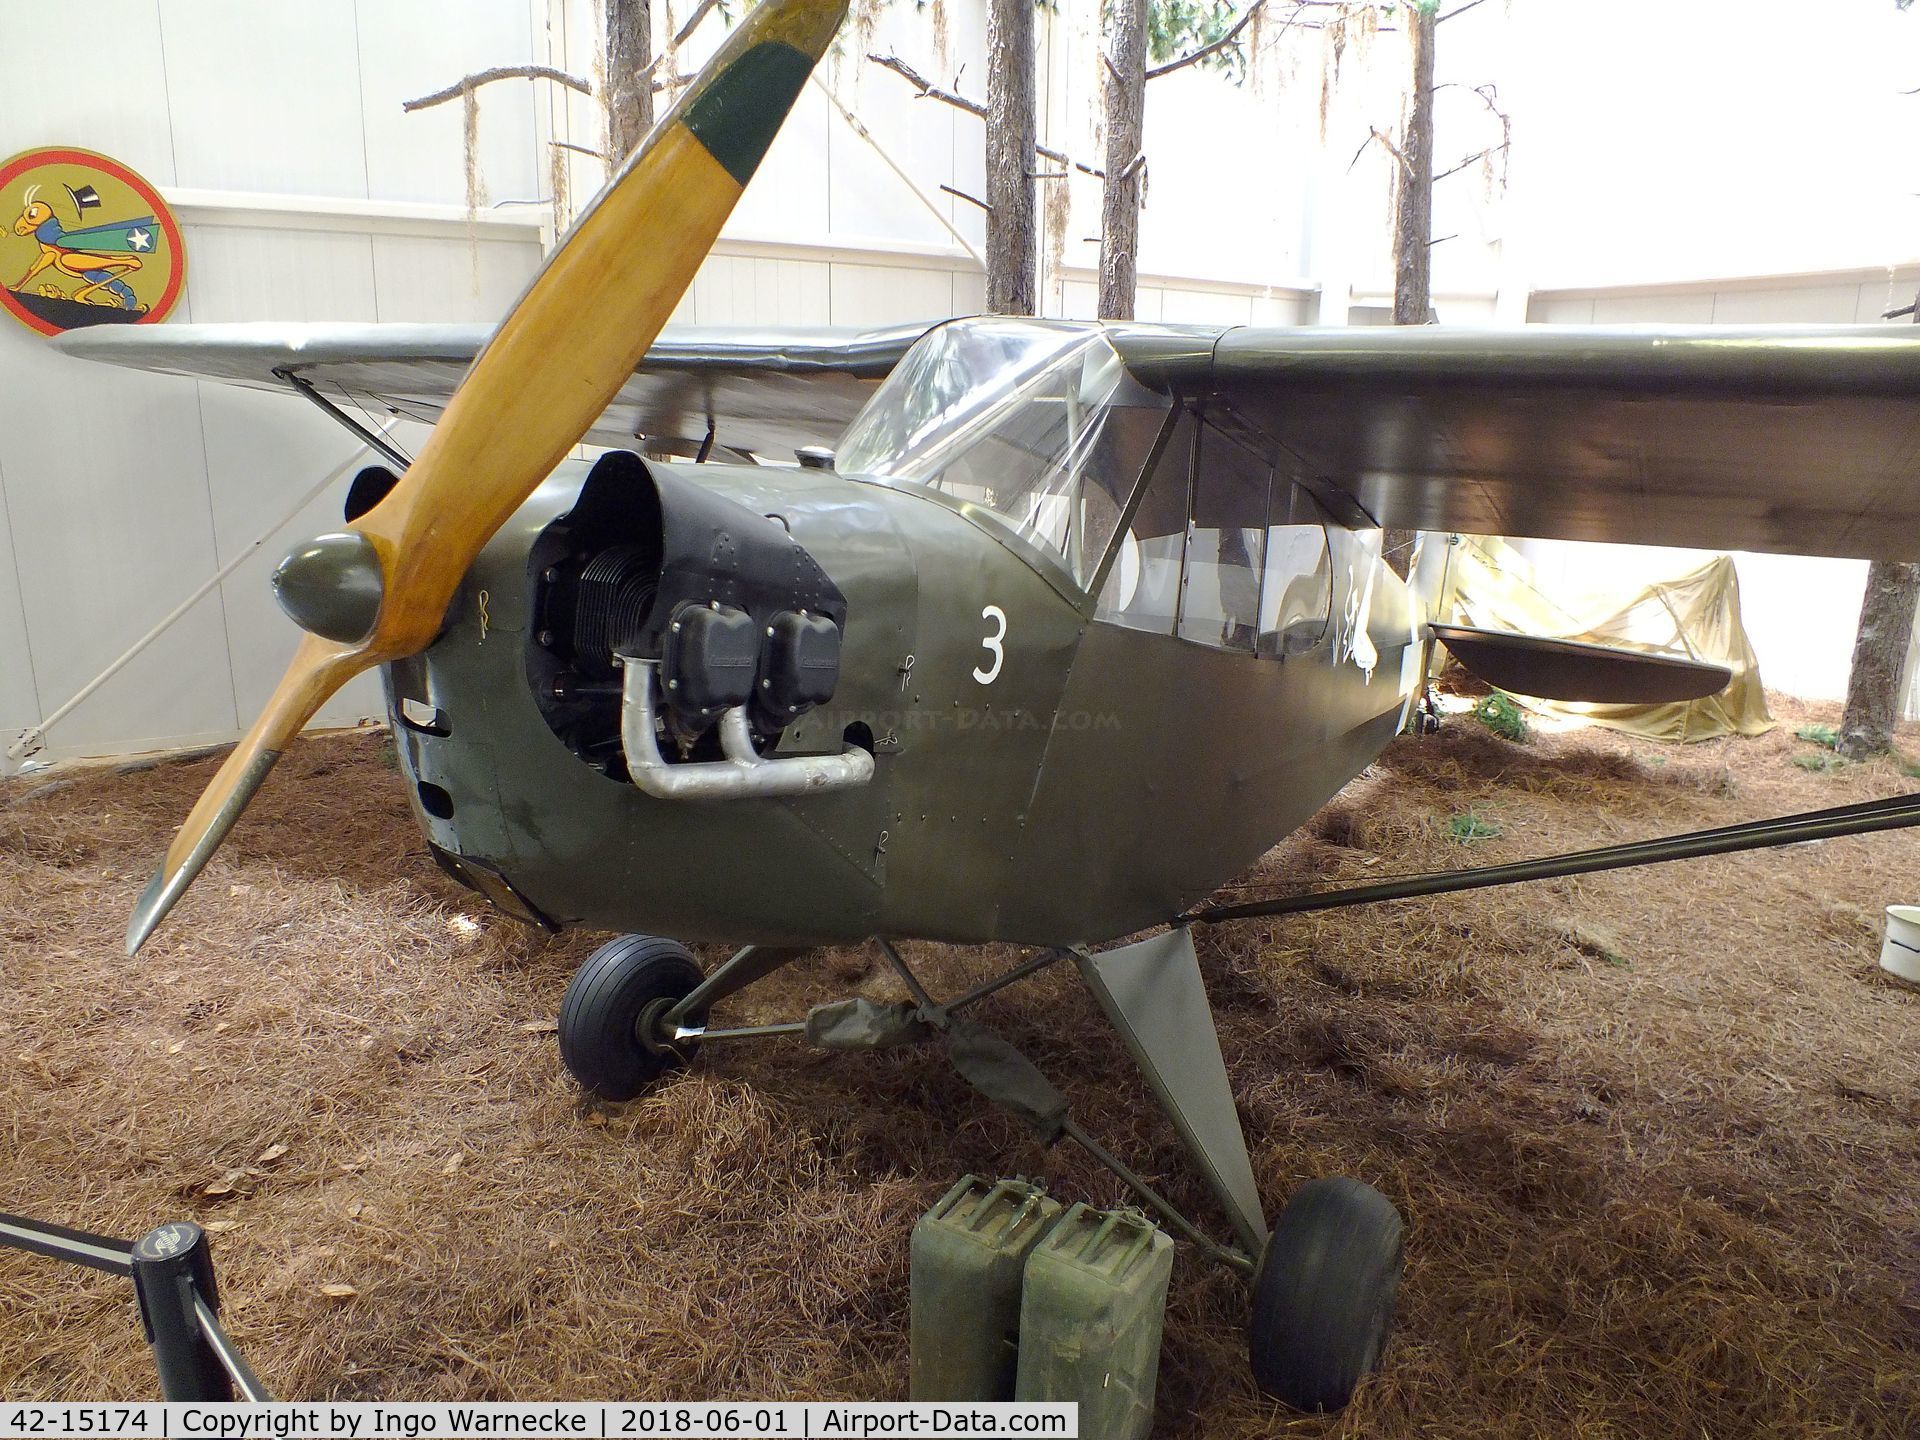 42-15174, 1942 Piper L-4B Grasshopper (O-59A / J3C-65) C/N 8293, Piper L-4B / O-58A / J3C-65 'Grashopper' at the US Army Aviation Museum, Ft. Rucker